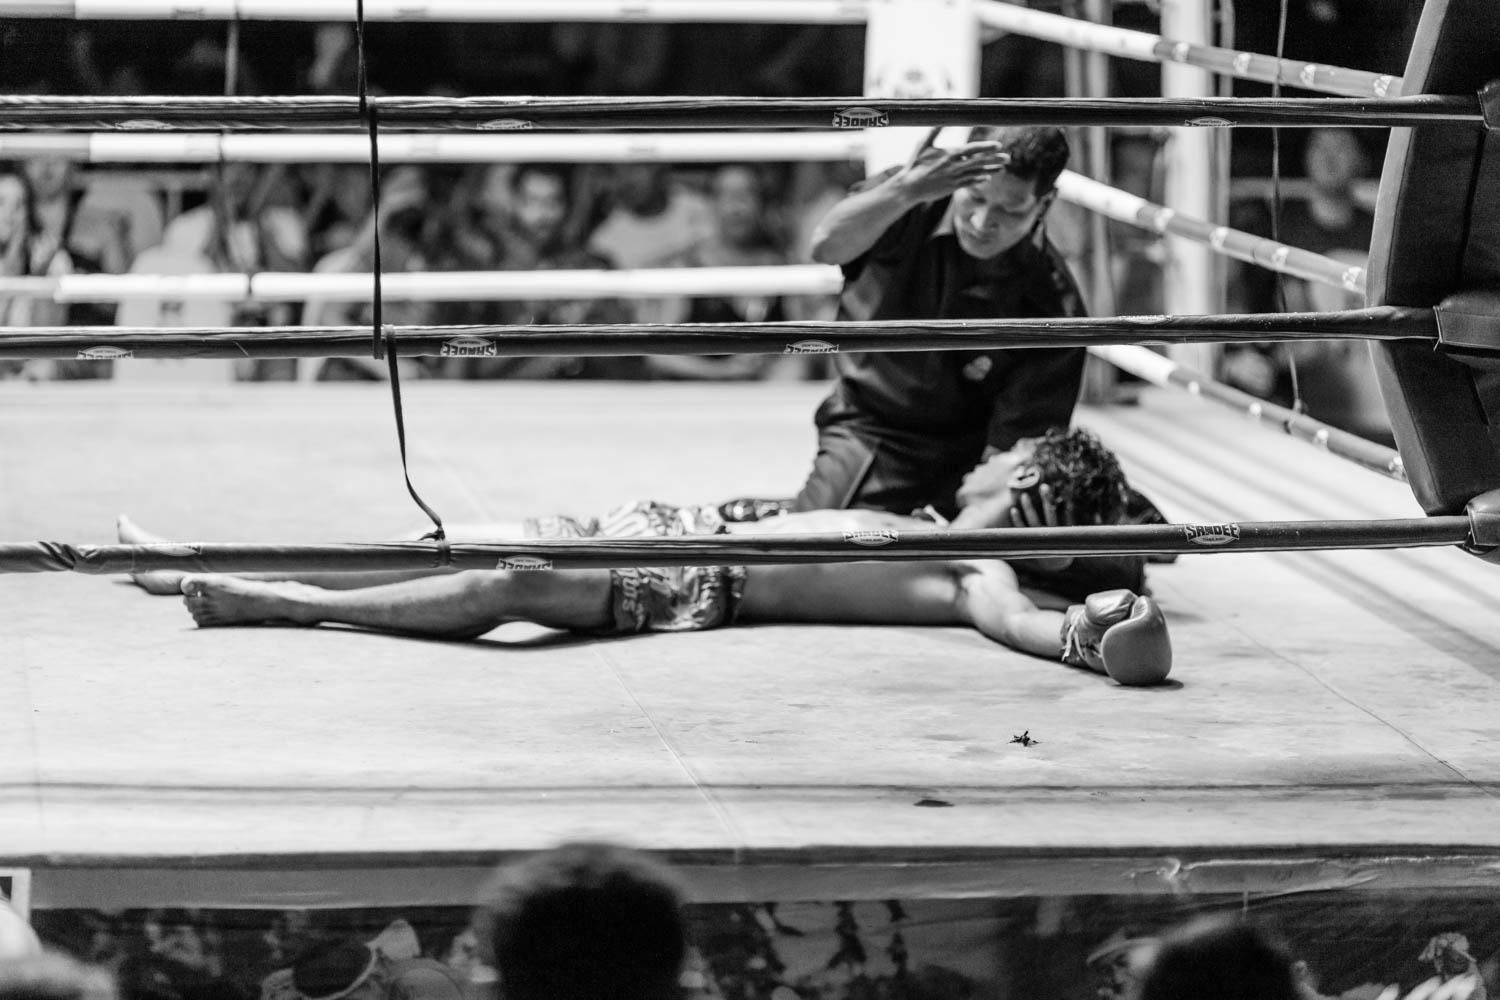 Muay Thai boxing fighter is knocked out, Phuket - Thailand.